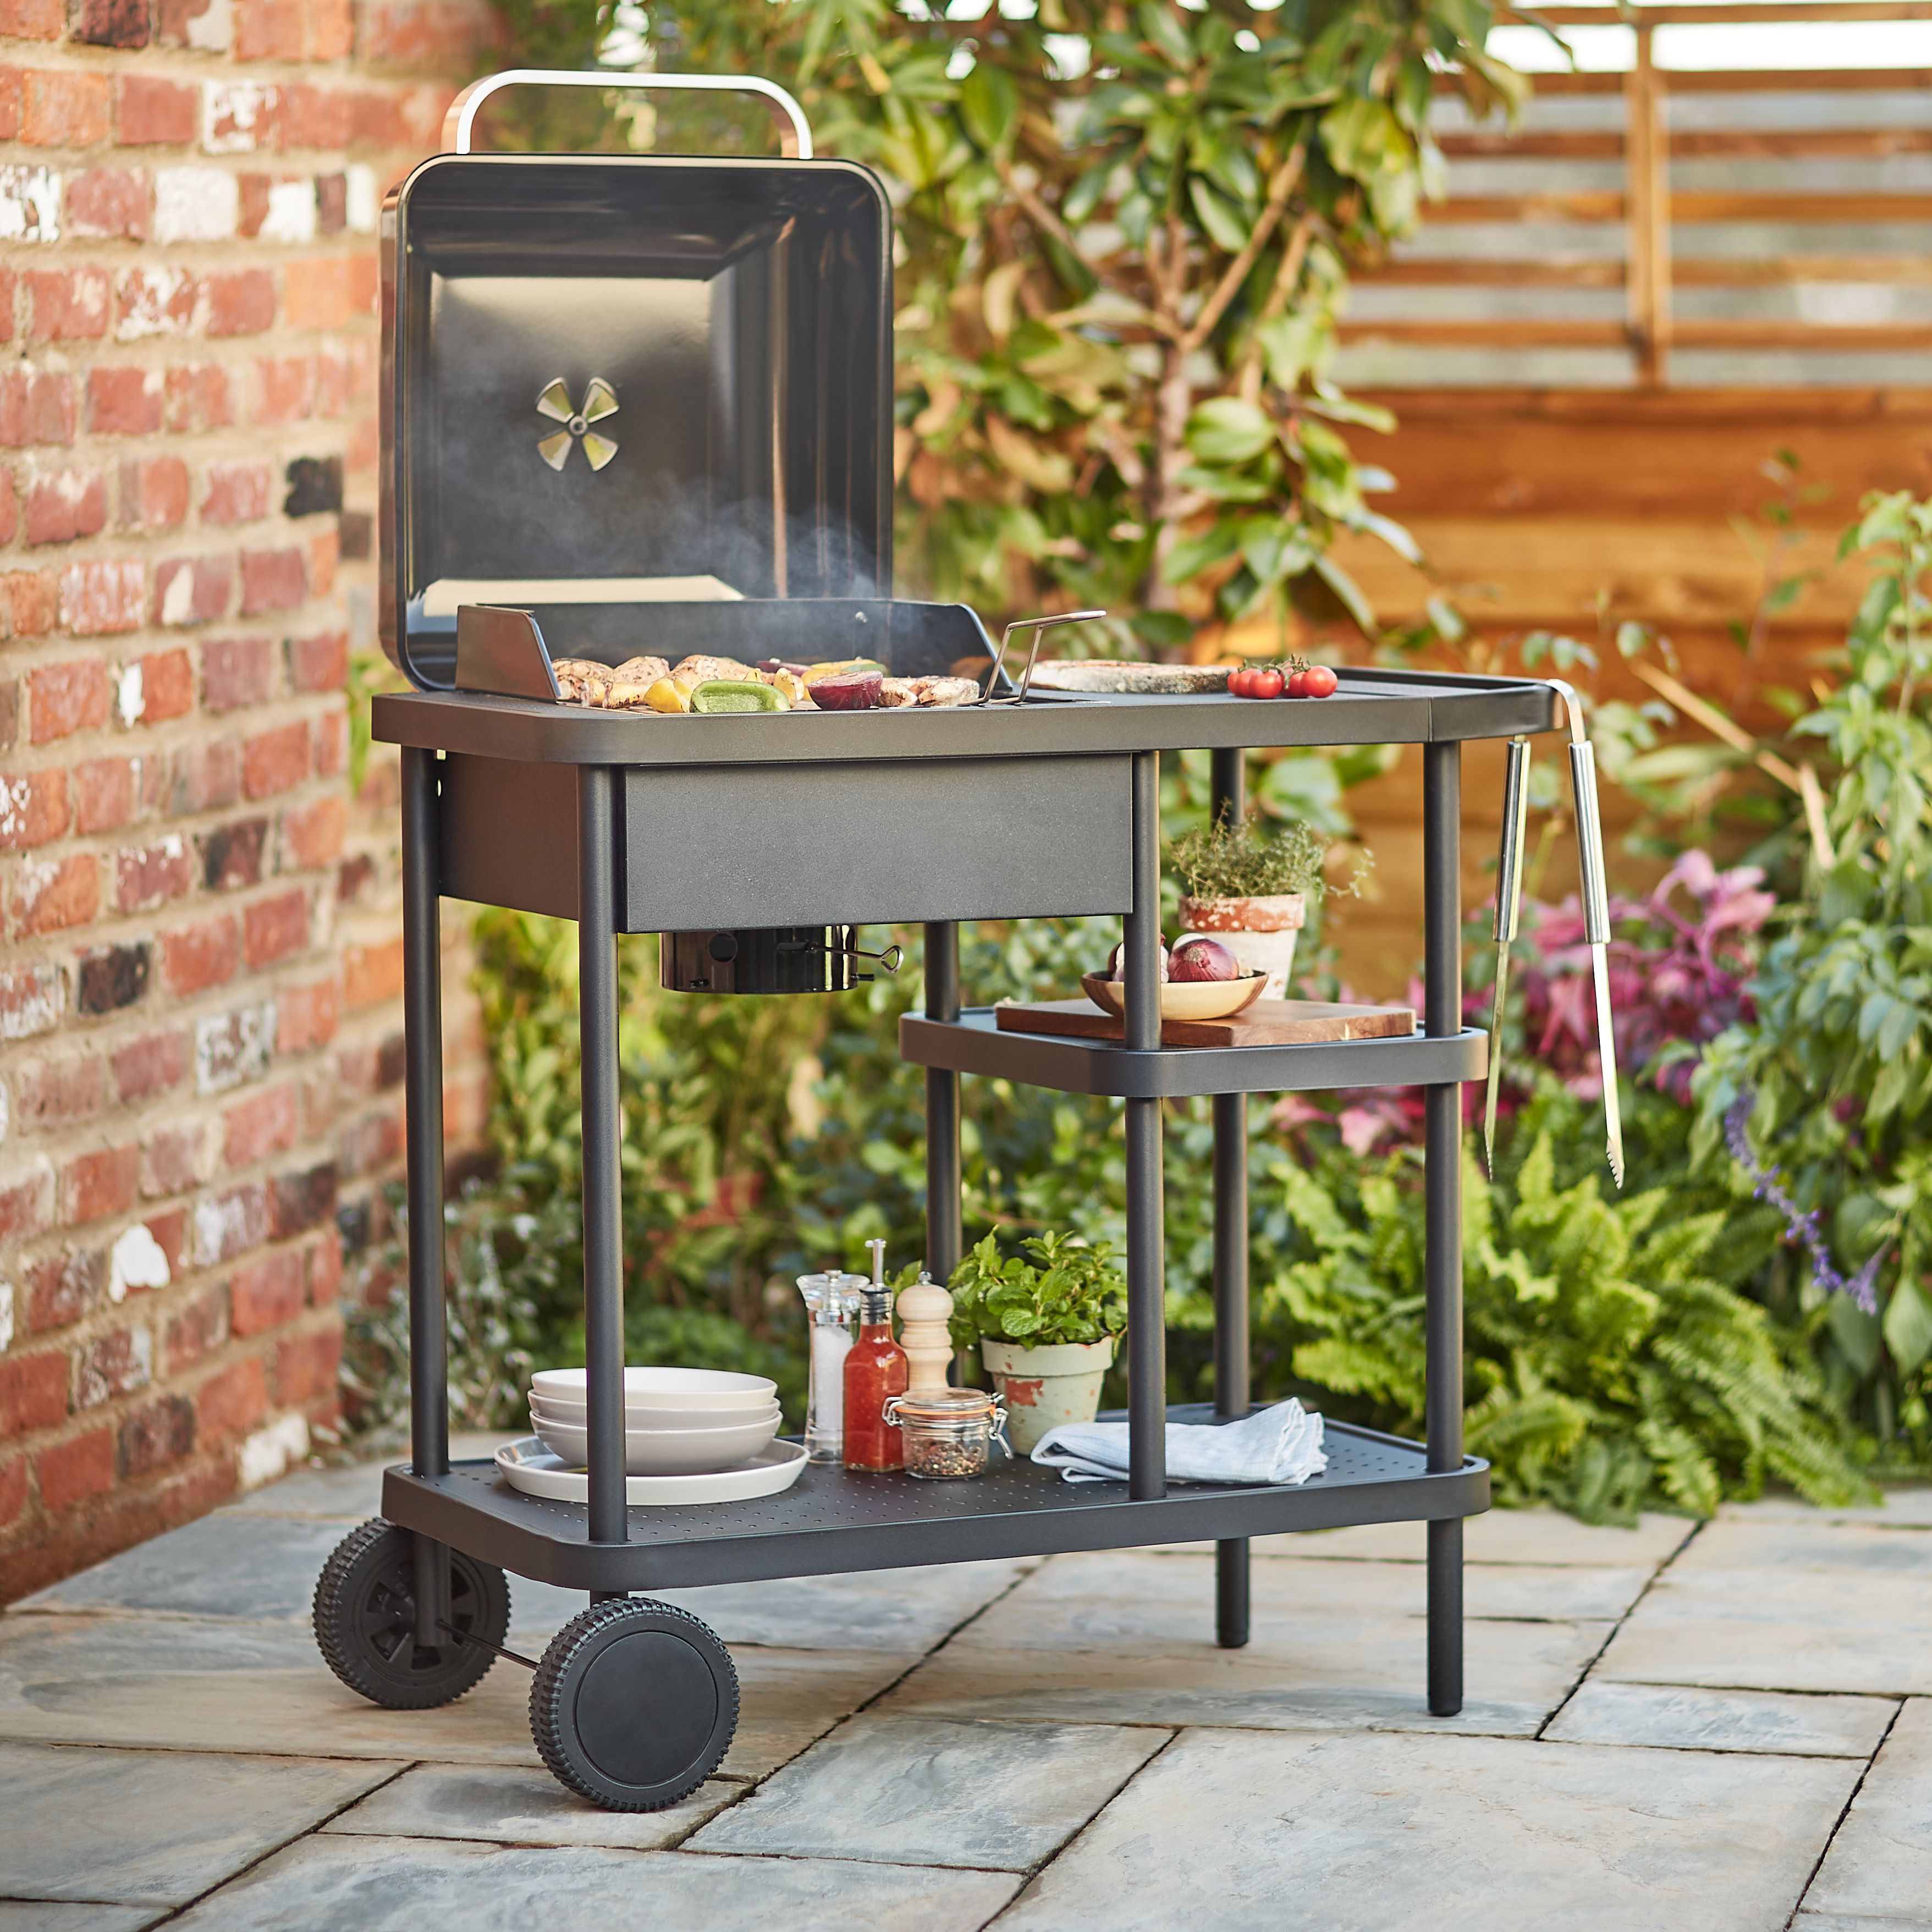 Blooma Rockwell 210 Black Charcoal Barbecue | DIY at B&Q